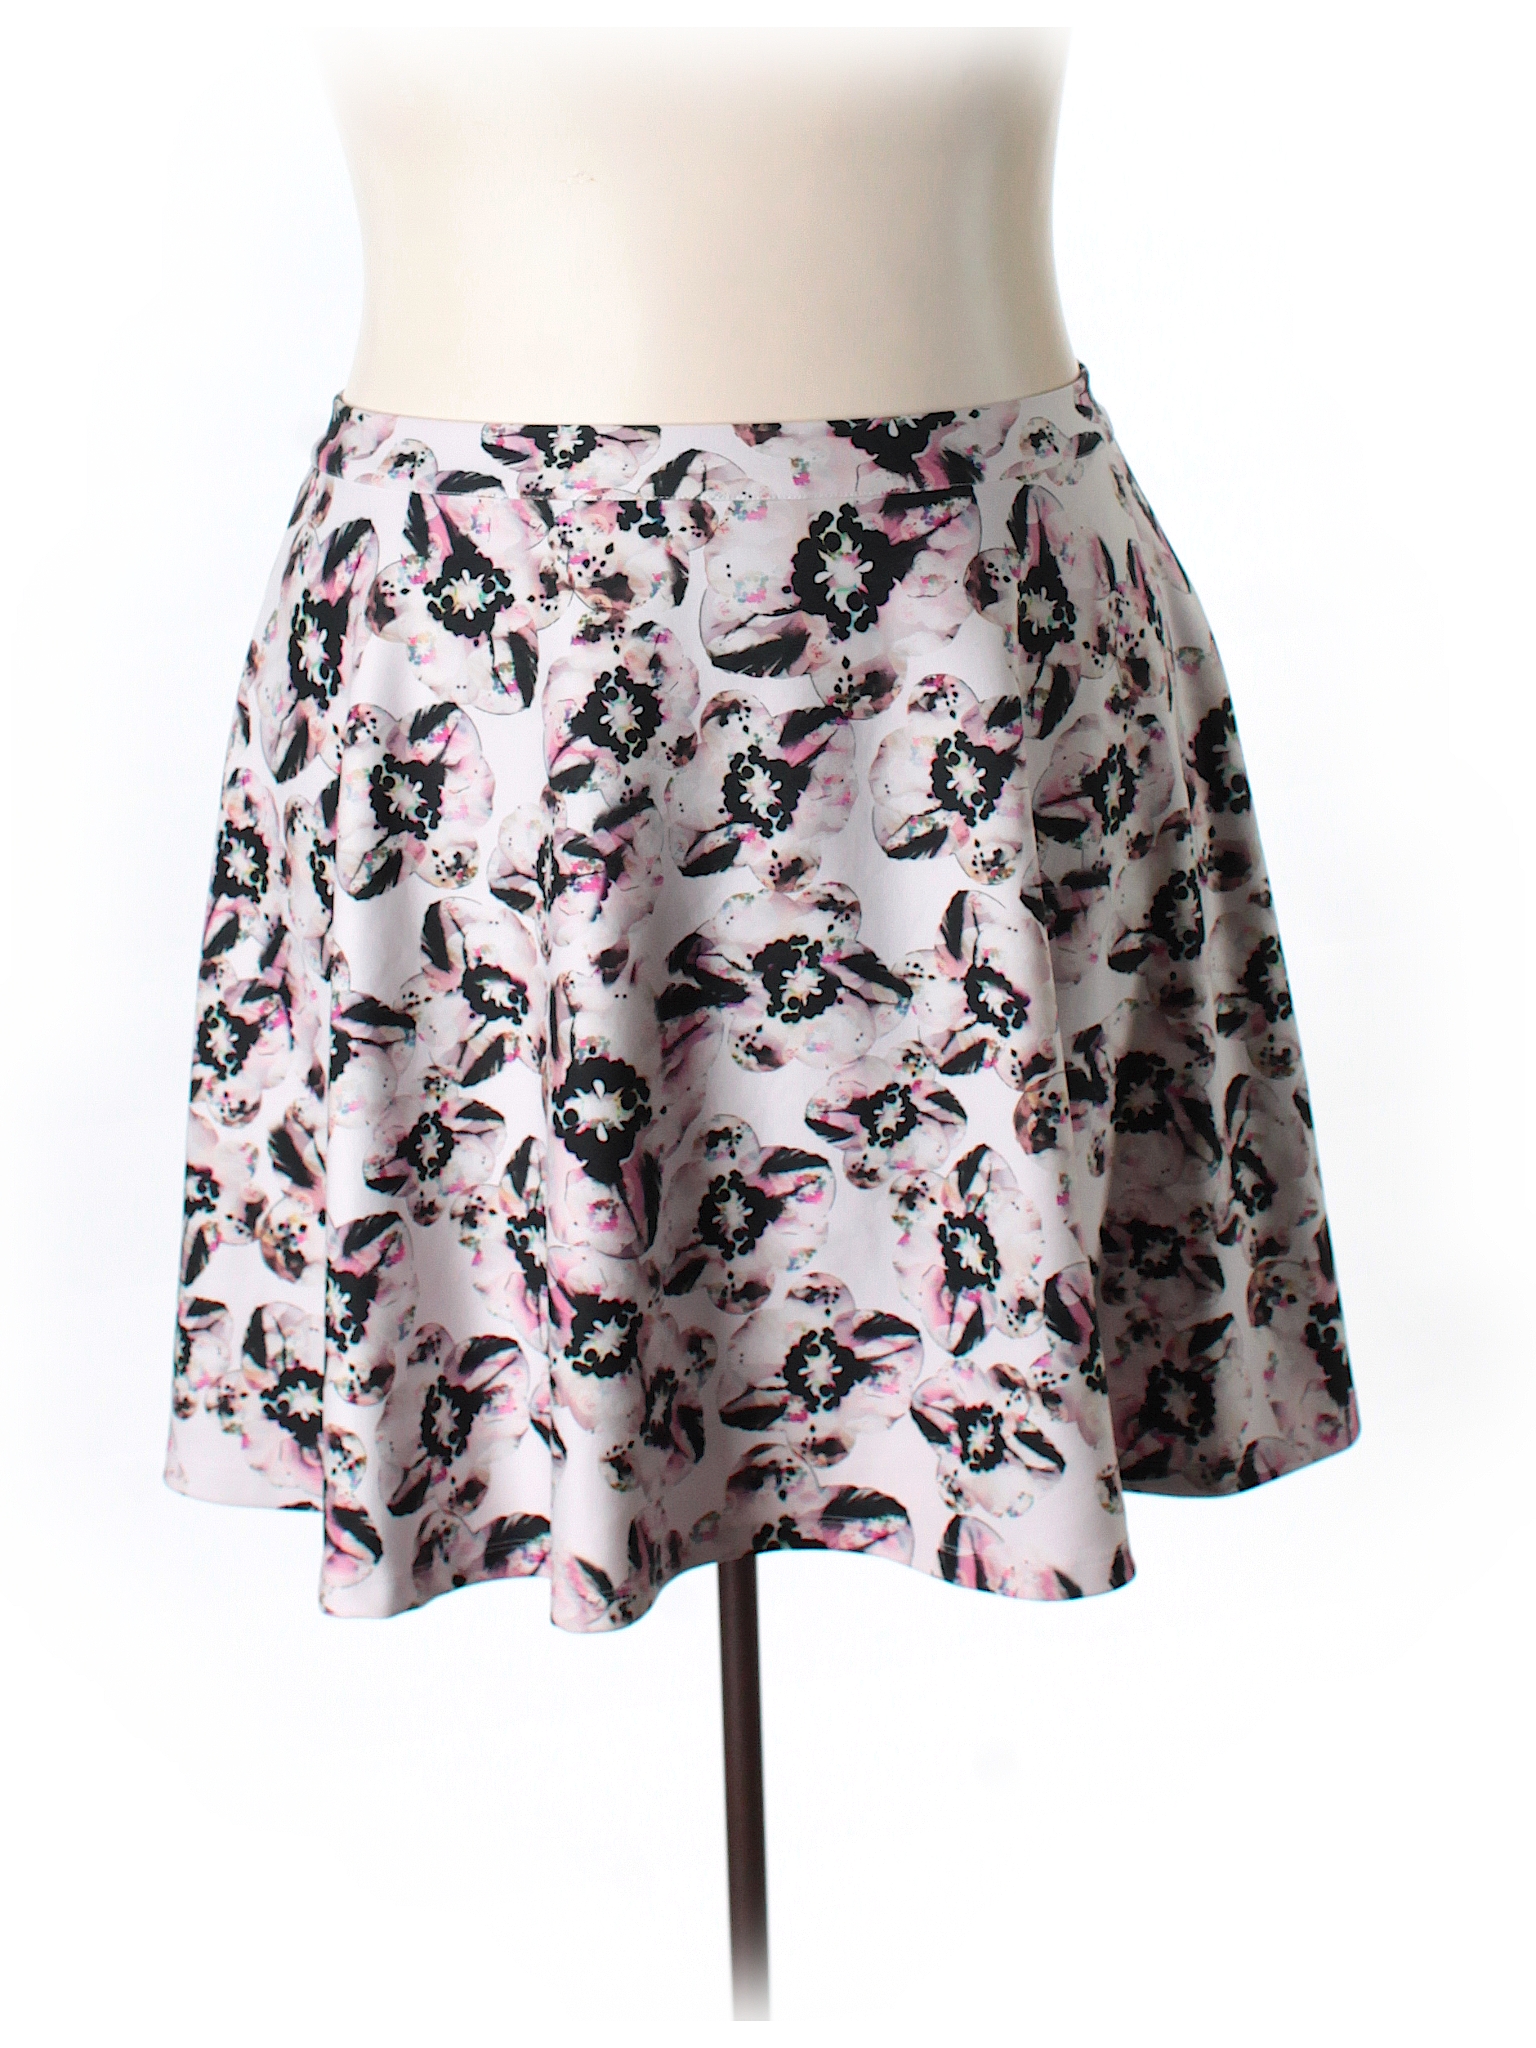 Isabel + Alice Print Light Purple Casual Skirt Size 3X (Plus) - 74% off ...